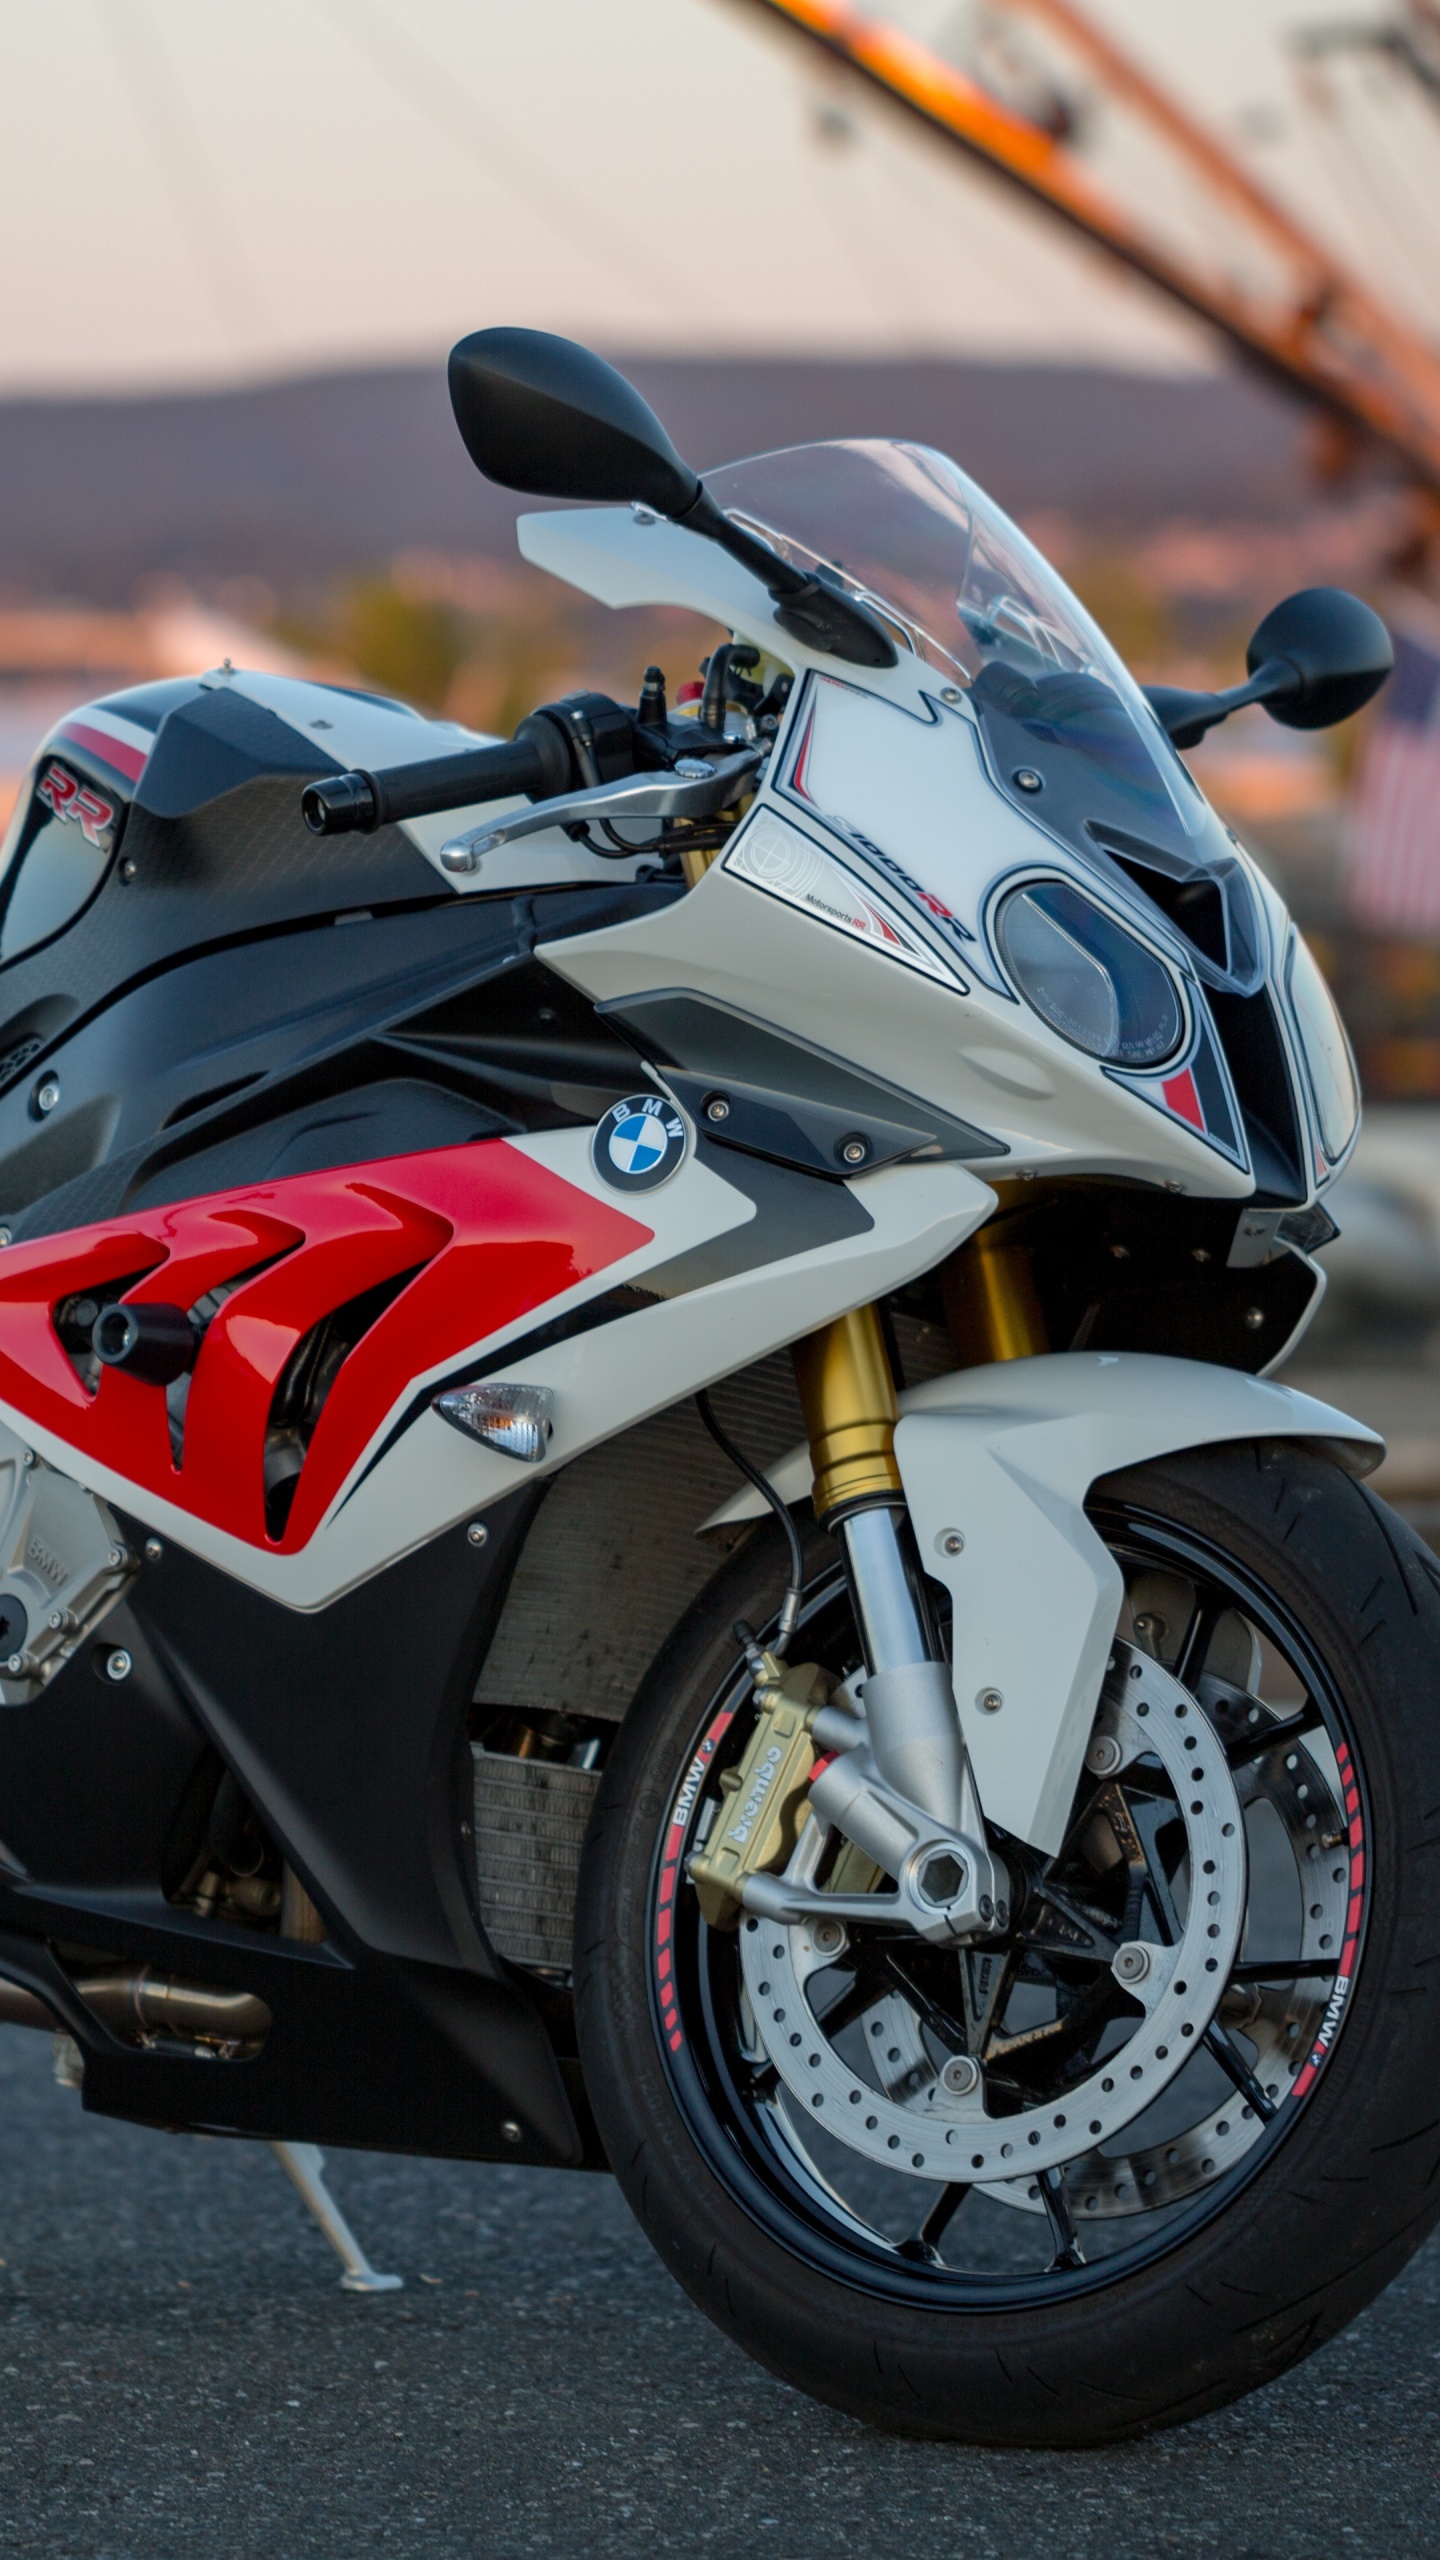 Red and Black Sports Bike on Road During Daytime. Wallpaper in 1440x2560 Resolution